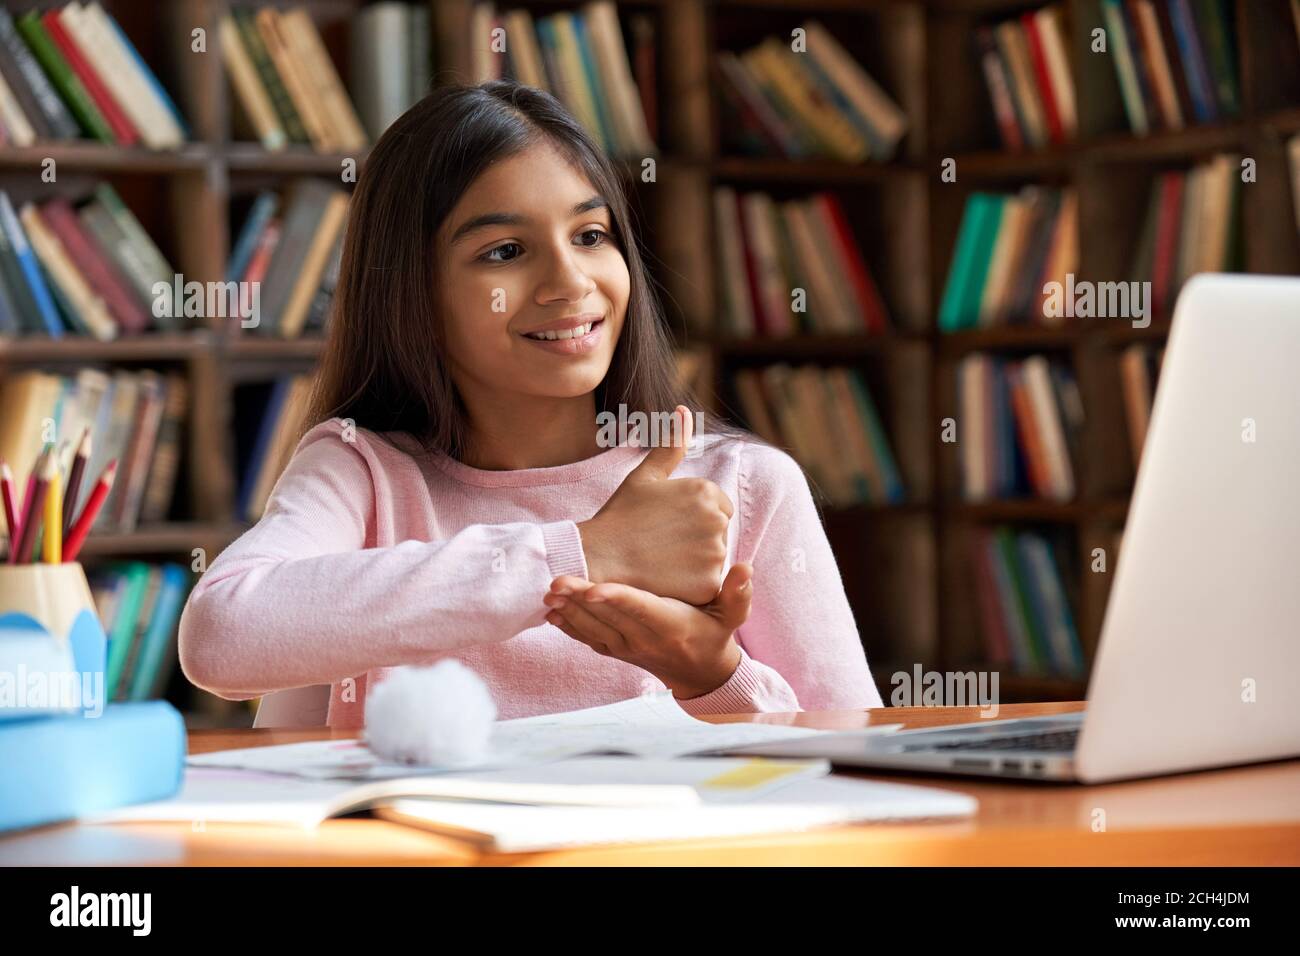 School girl learning online communicating by video call using sign language. Stock Photo